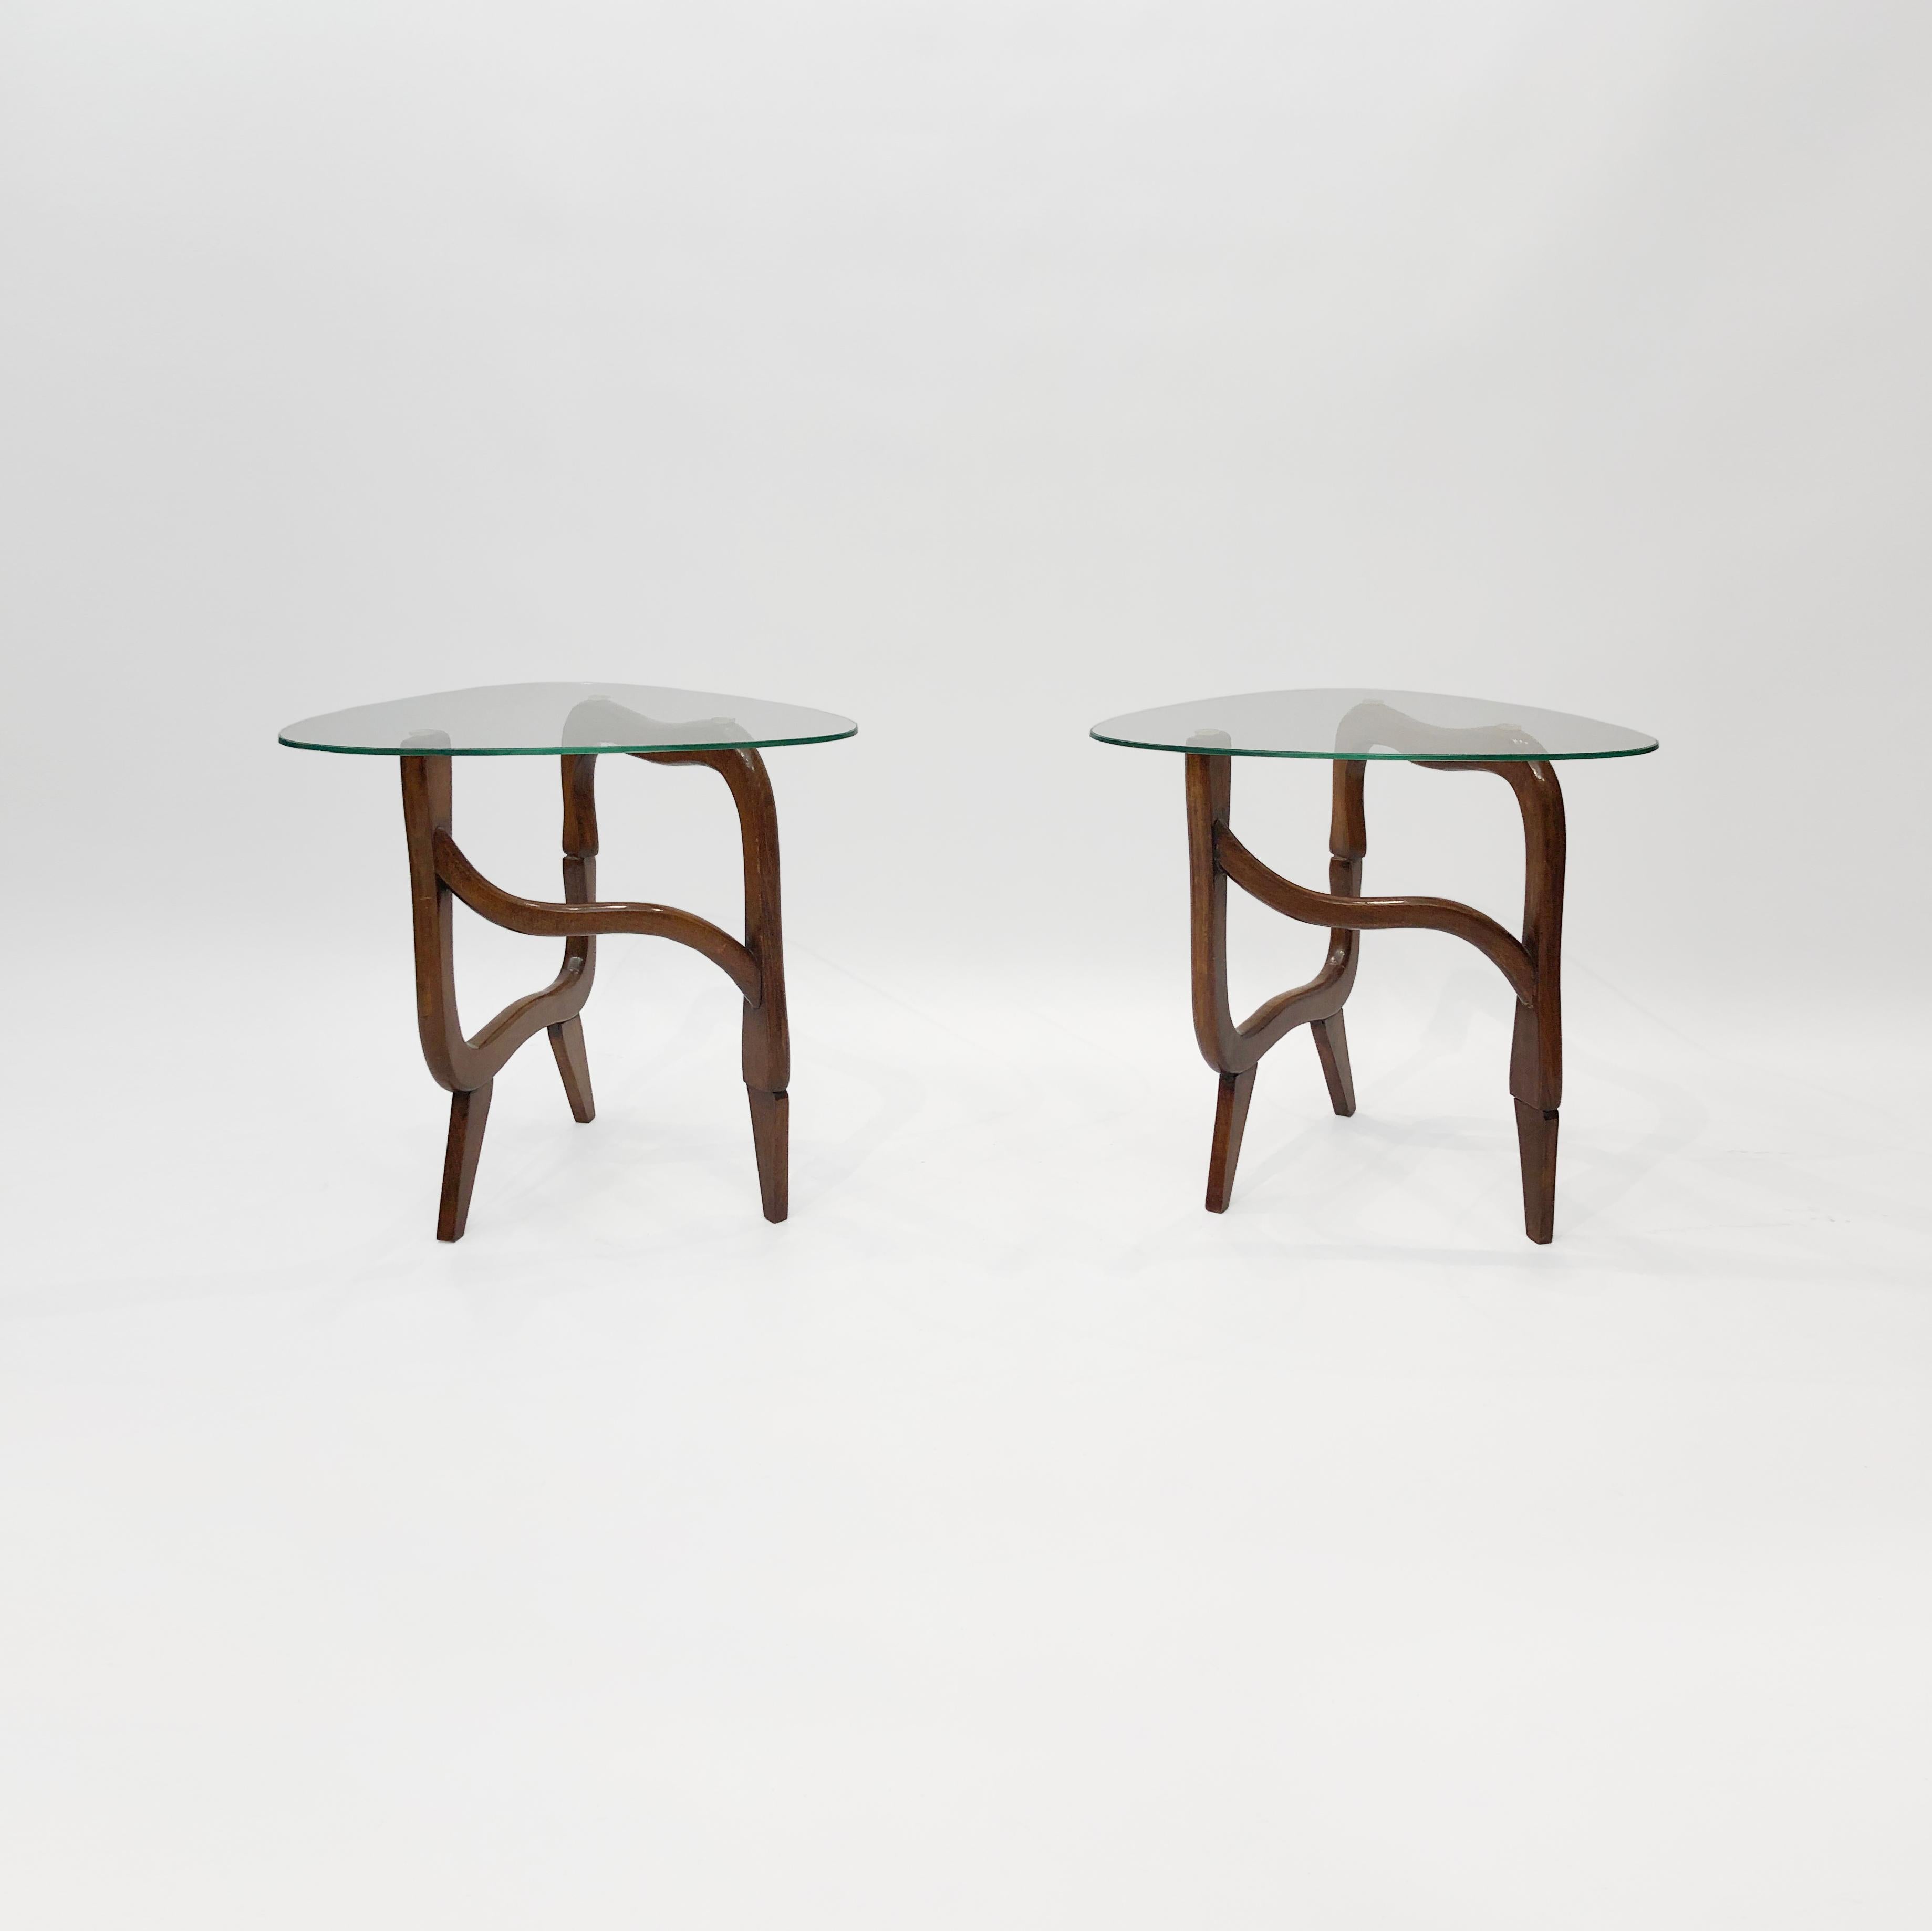 An interesting pair of teak side tables with organic twisting bases and triangular glass tops, particularly reminiscent of the Isamu Noguchi’s eponymous Classic coffee table of the 1947. The delicate yet durable form of the polymorphic teak base is